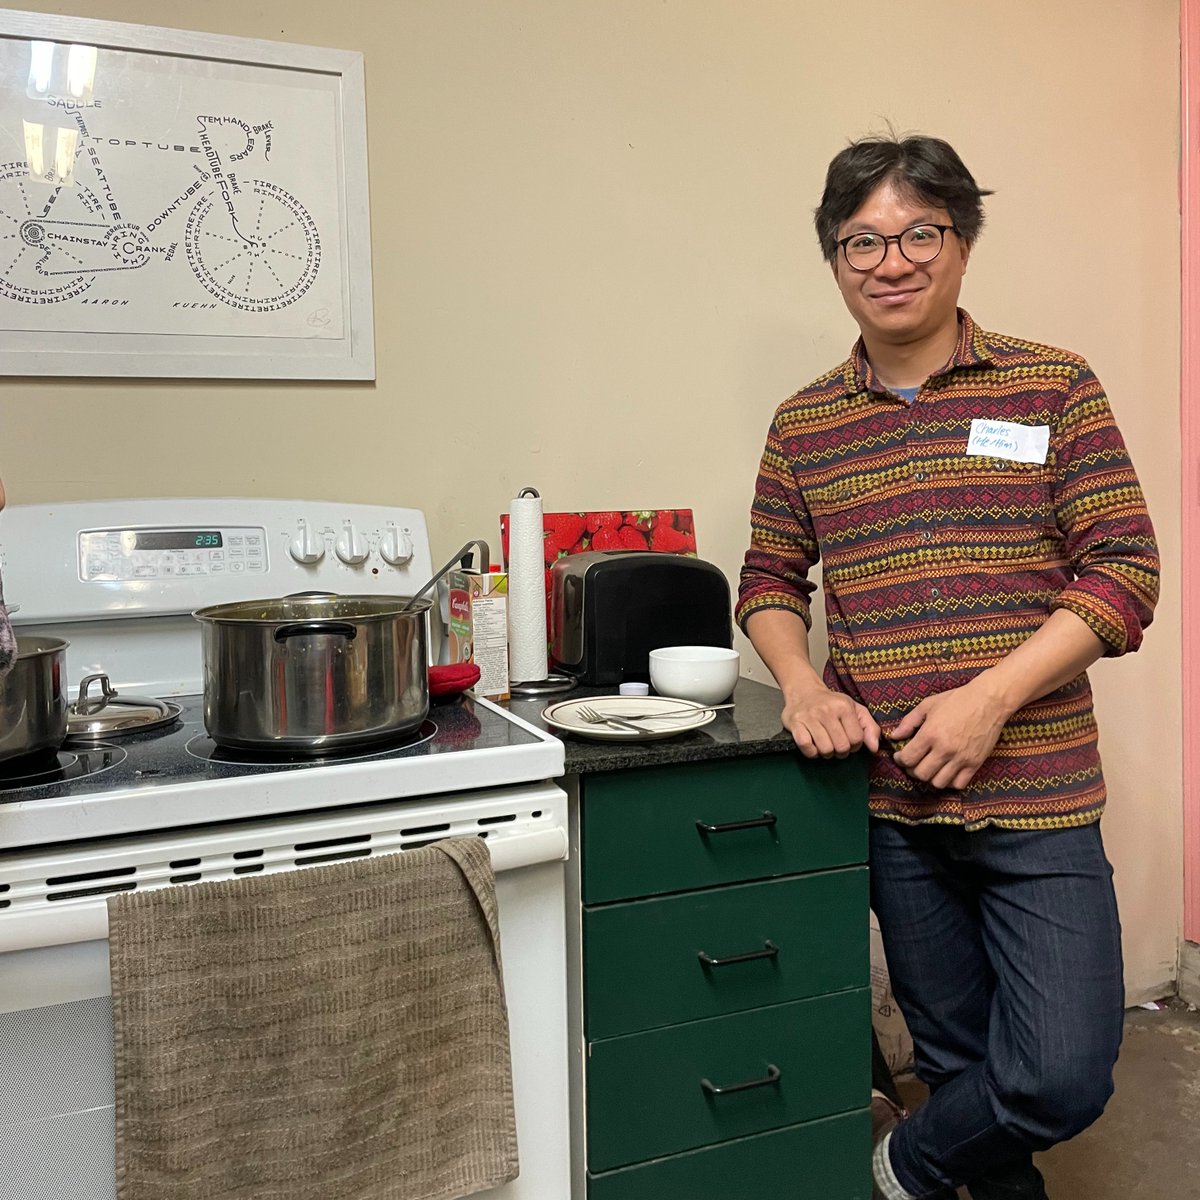 A shout out to volunteer (and our former Executive Director!) Charles Chiu for your faithful commitment to the Build-A-Bike program, and for being a wonderful chef this week for the participants' fresh-made meal. #nationalvolunteerweek #BuildABike #skillsdevelopment #foodaccess